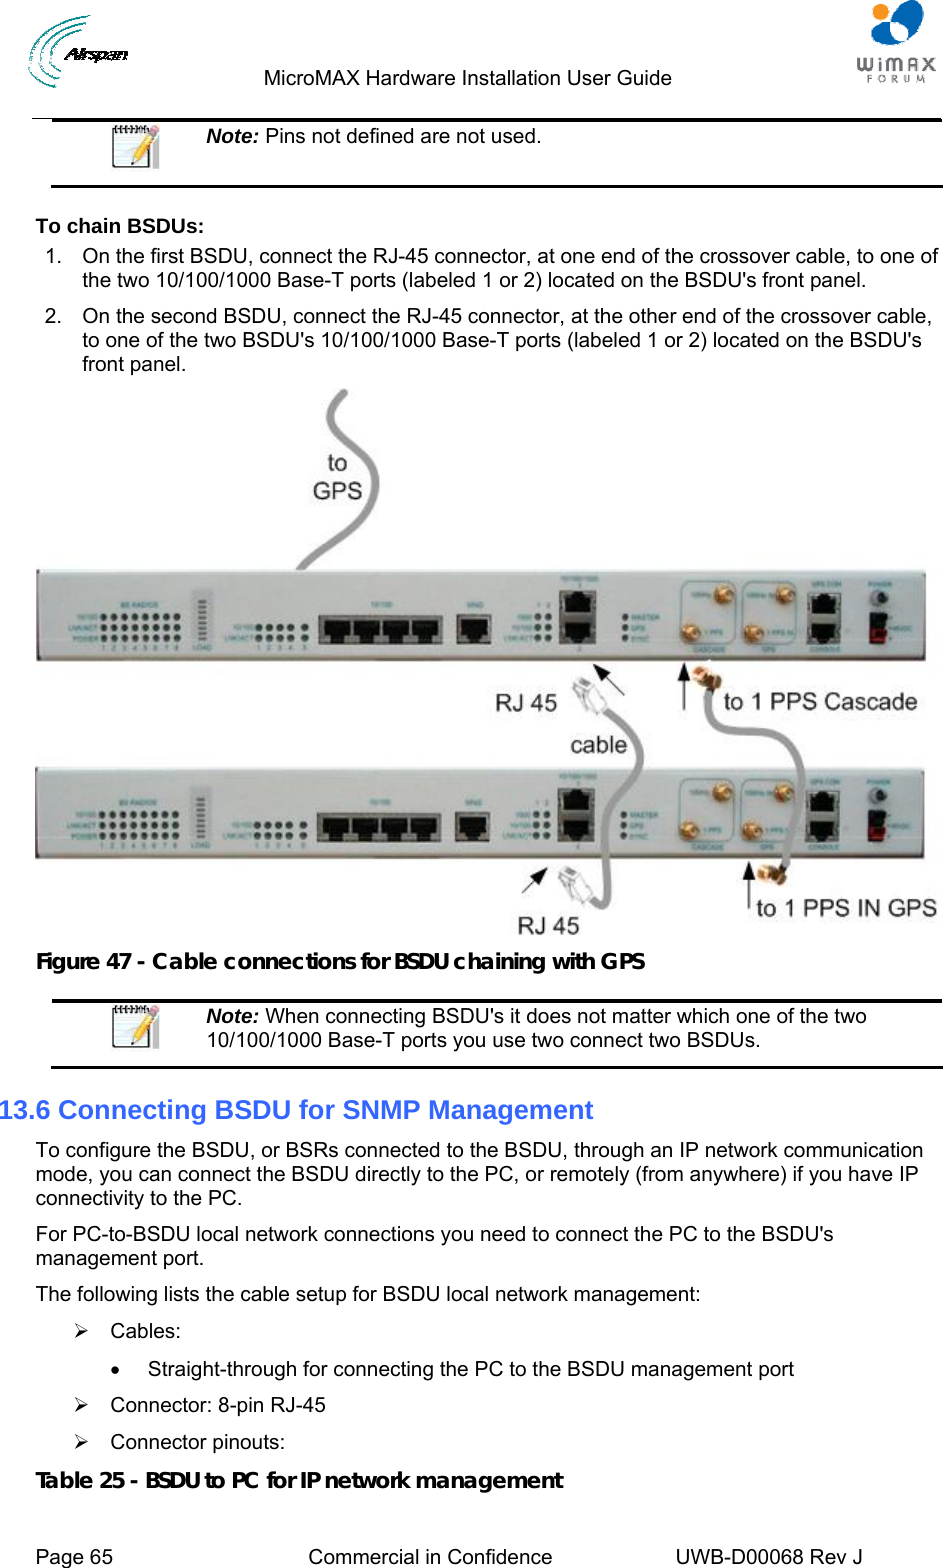                                  MicroMAX Hardware Installation User Guide     Page 65  Commercial in Confidence  UWB-D00068 Rev J    Note: Pins not defined are not used.  To chain BSDUs: 1.  On the first BSDU, connect the RJ-45 connector, at one end of the crossover cable, to one of the two 10/100/1000 Base-T ports (labeled 1 or 2) located on the BSDU&apos;s front panel. 2.  On the second BSDU, connect the RJ-45 connector, at the other end of the crossover cable, to one of the two BSDU&apos;s 10/100/1000 Base-T ports (labeled 1 or 2) located on the BSDU&apos;s front panel.  Figure 47 - Cable connections for BSDU chaining with GPS   Note: When connecting BSDU&apos;s it does not matter which one of the two 10/100/1000 Base-T ports you use two connect two BSDUs. 13.6 Connecting BSDU for SNMP Management To configure the BSDU, or BSRs connected to the BSDU, through an IP network communication mode, you can connect the BSDU directly to the PC, or remotely (from anywhere) if you have IP connectivity to the PC. For PC-to-BSDU local network connections you need to connect the PC to the BSDU&apos;s management port. The following lists the cable setup for BSDU local network management: ¾ Cables:   •  Straight-through for connecting the PC to the BSDU management port ¾  Connector: 8-pin RJ-45  ¾ Connector pinouts: Table 25 - BSDU to PC for IP network management 